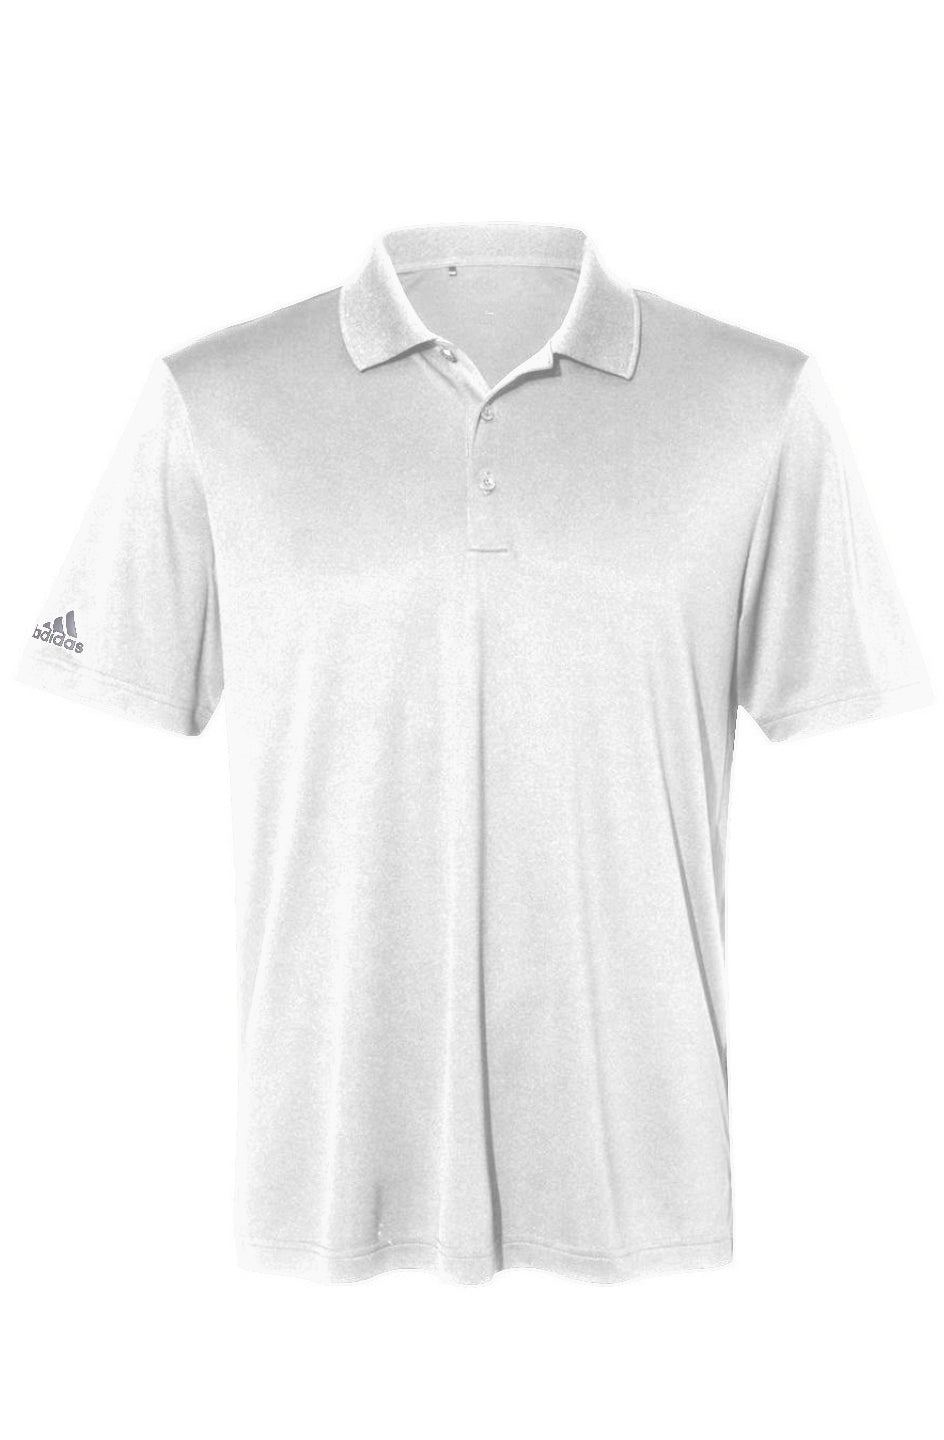 "ANDREW" Adidas Men Performance Polo - OnlyFit